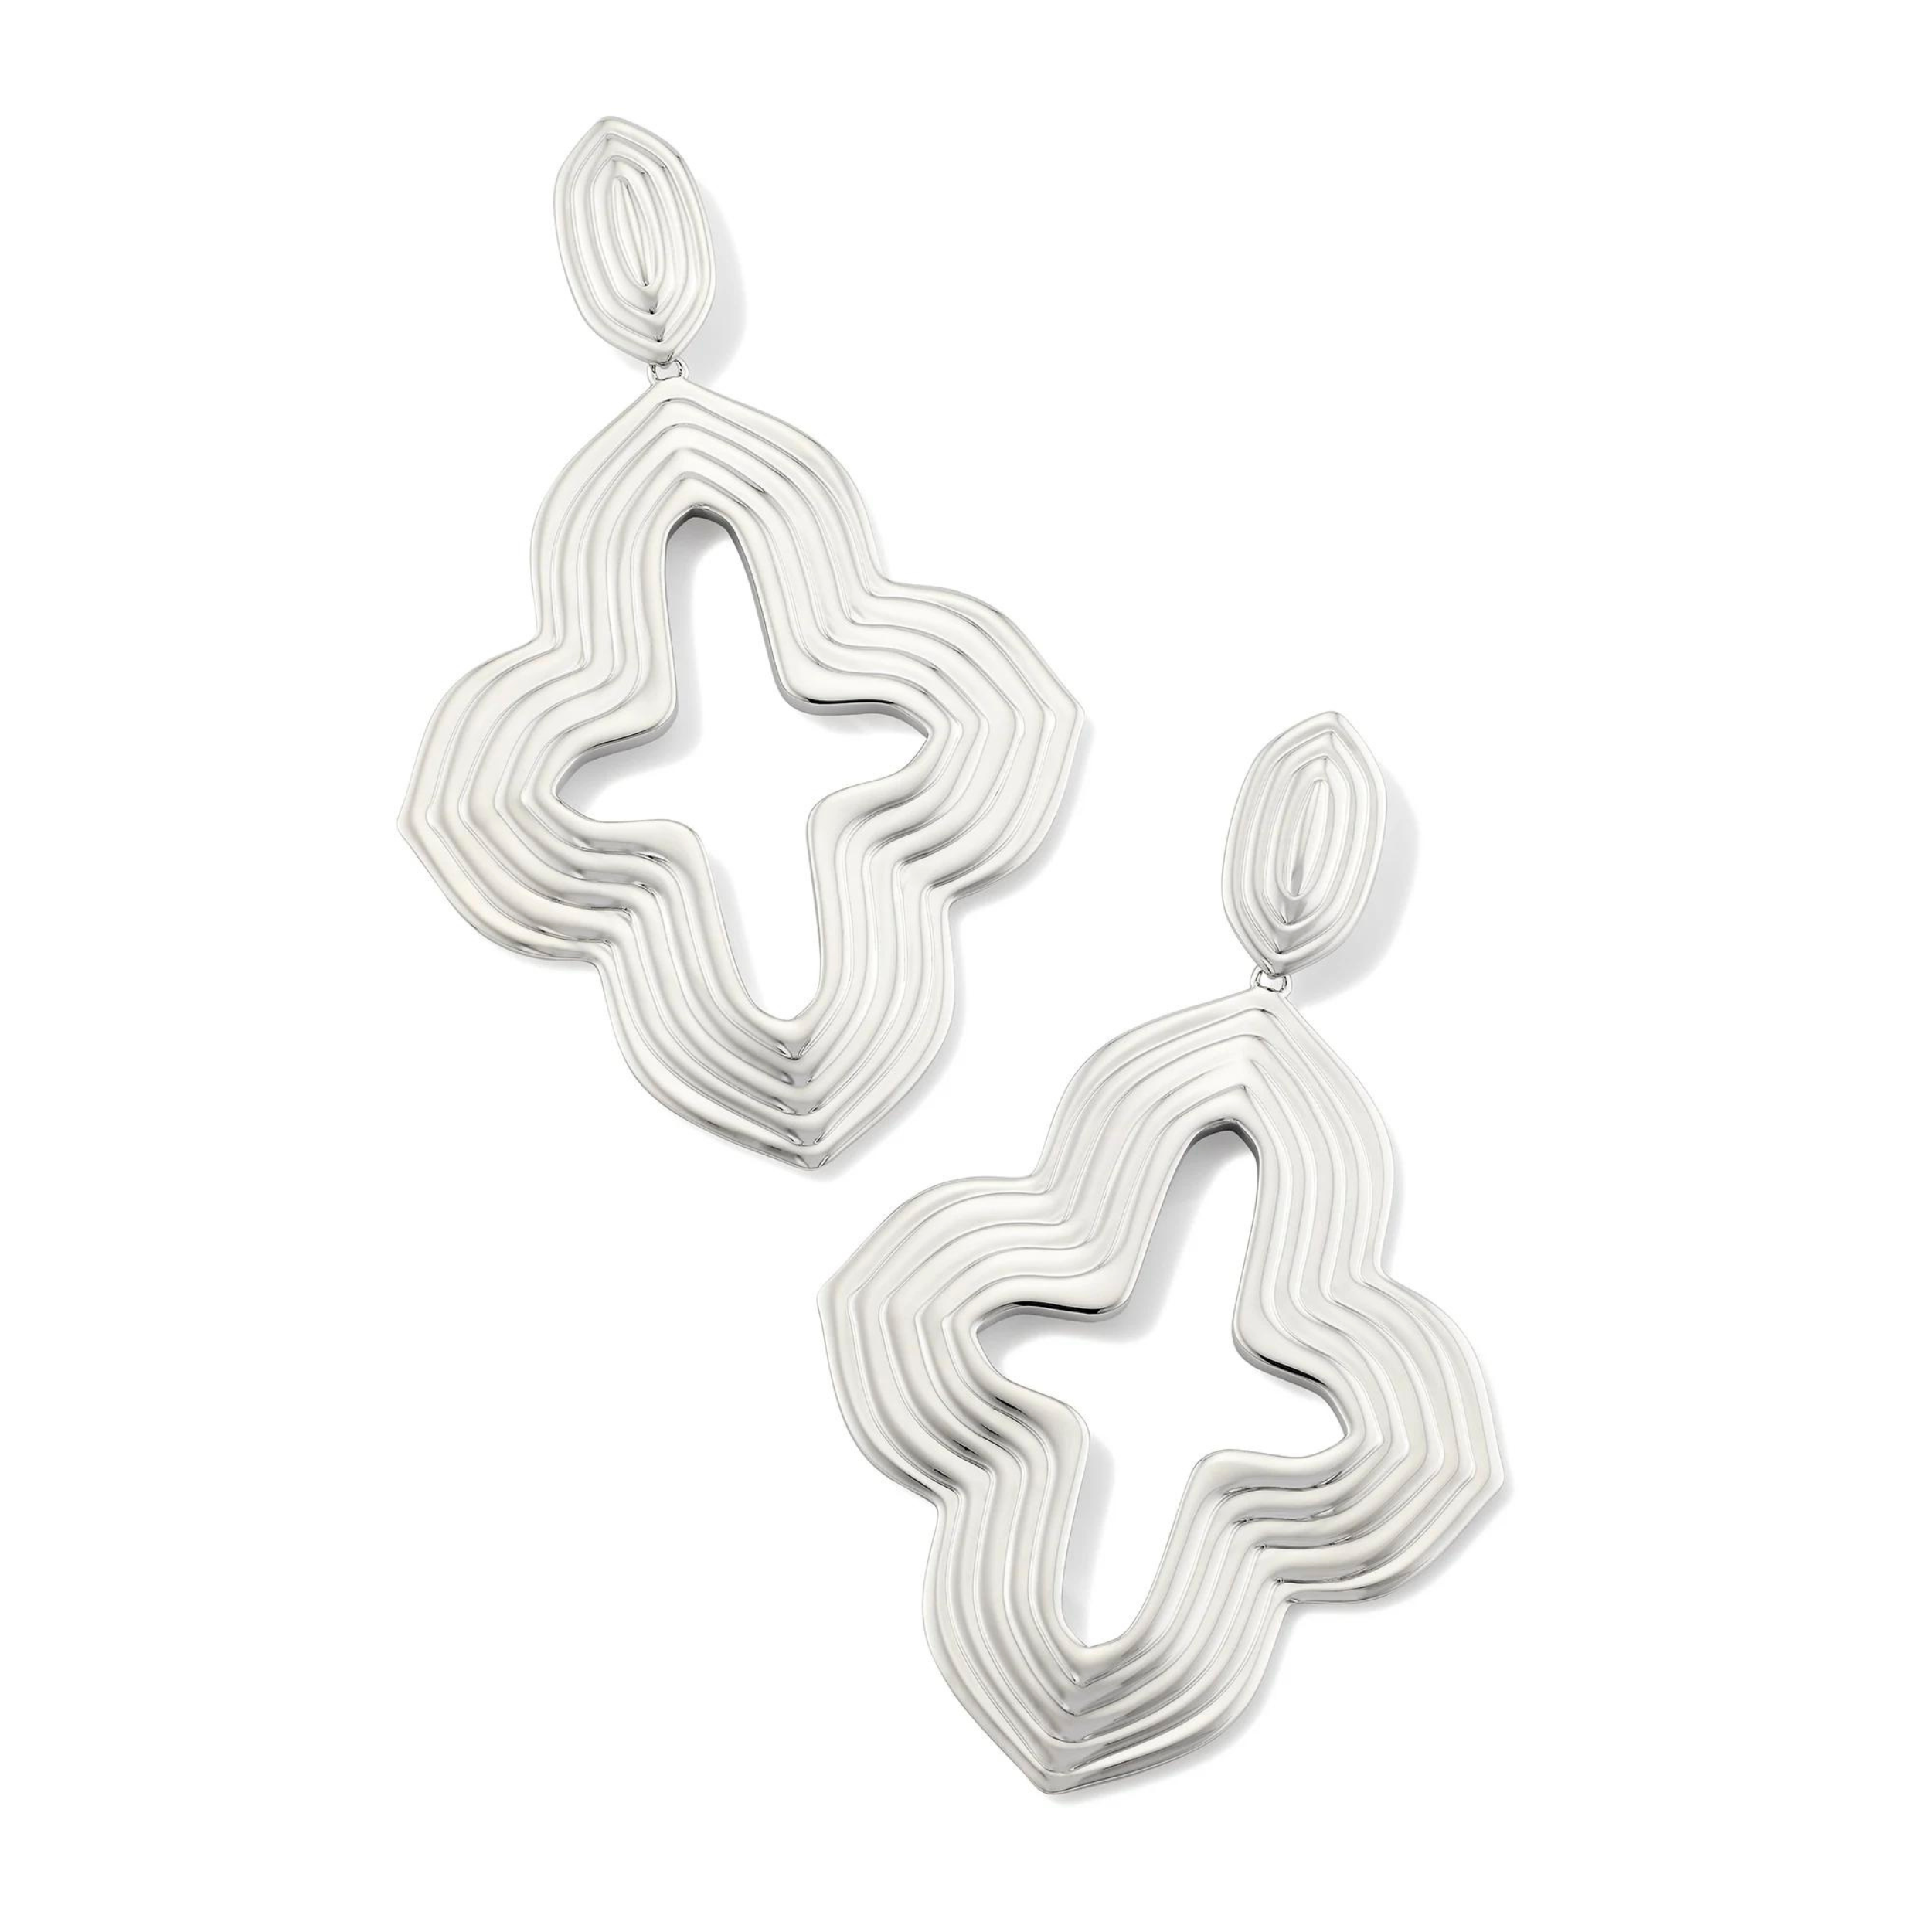 Pictured is a silver, statement drop earrings on a white background.    